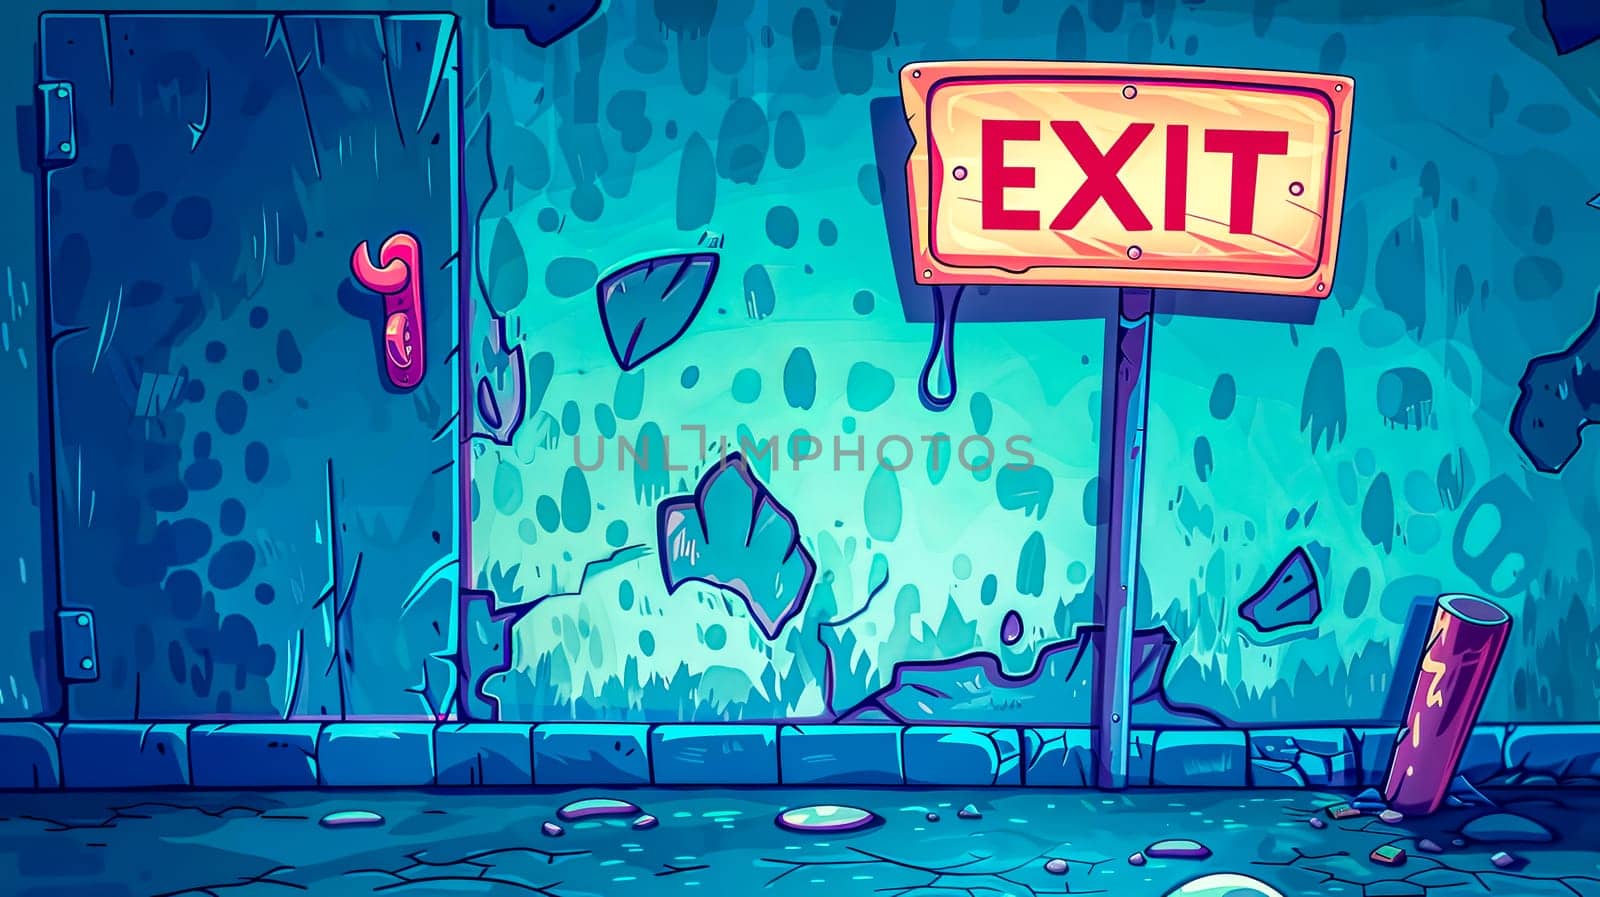 Vibrant, illustrated scene depicting an exit sign in a whimsically eerie alleyway with glowing ambiance